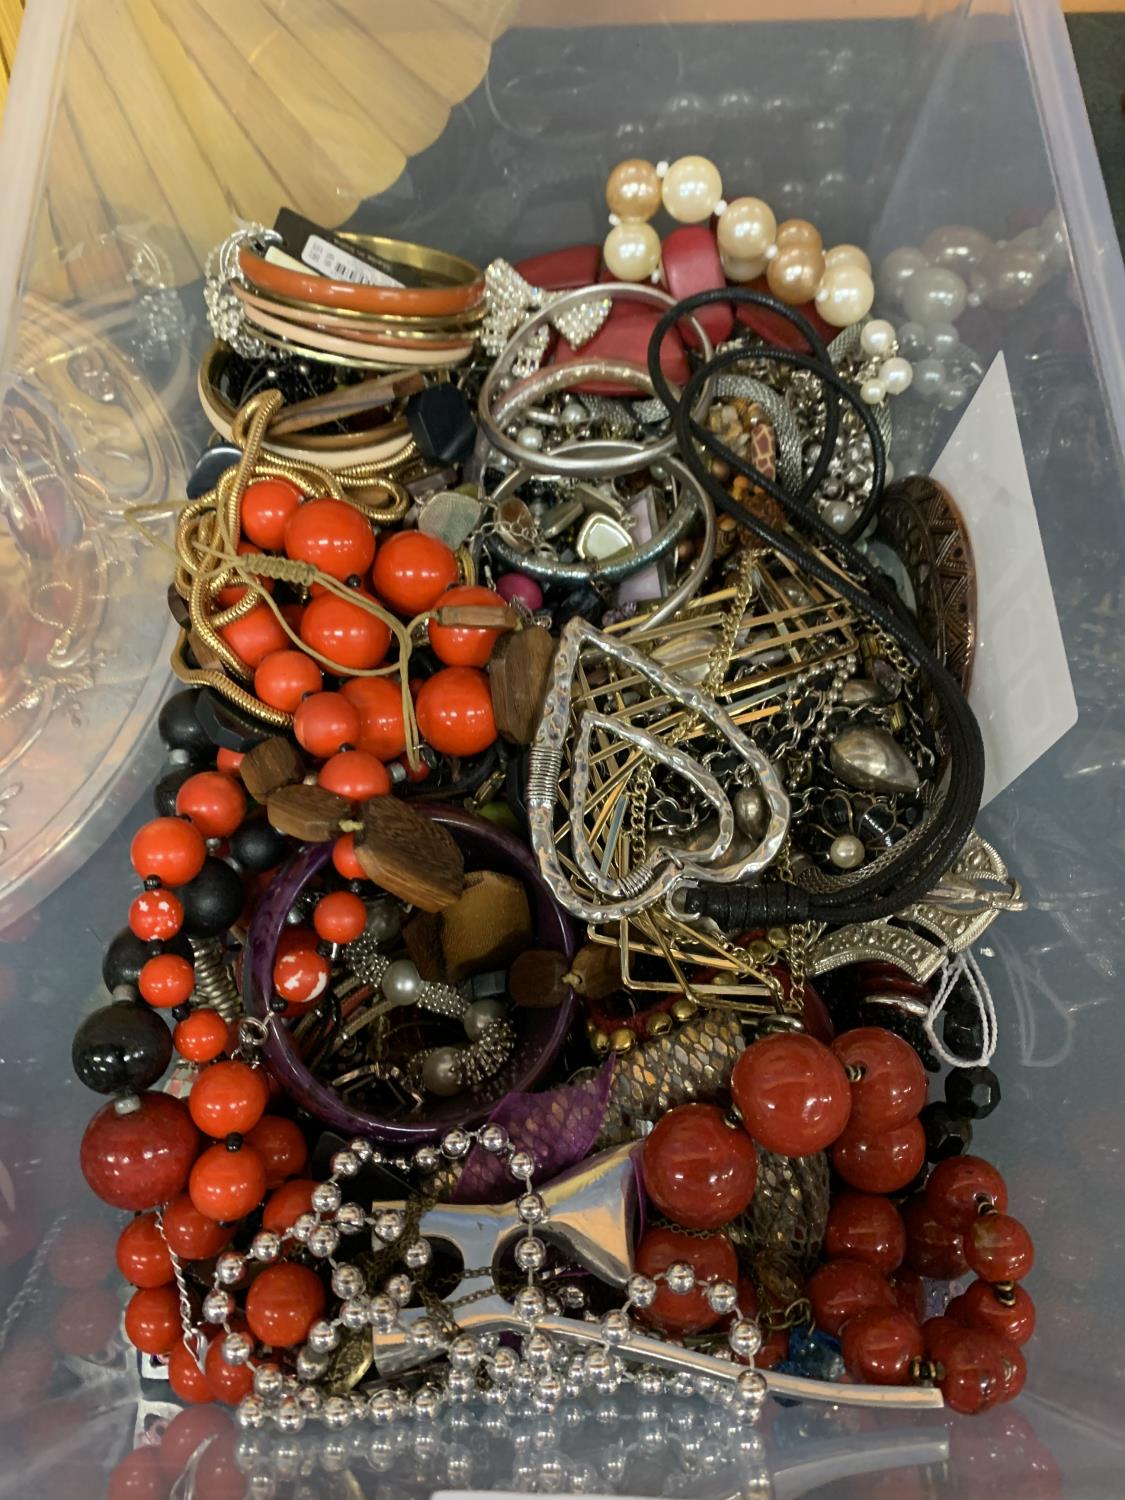 A LARGE QUANTITY OF ASSORTED COSTUME JEWELLERY